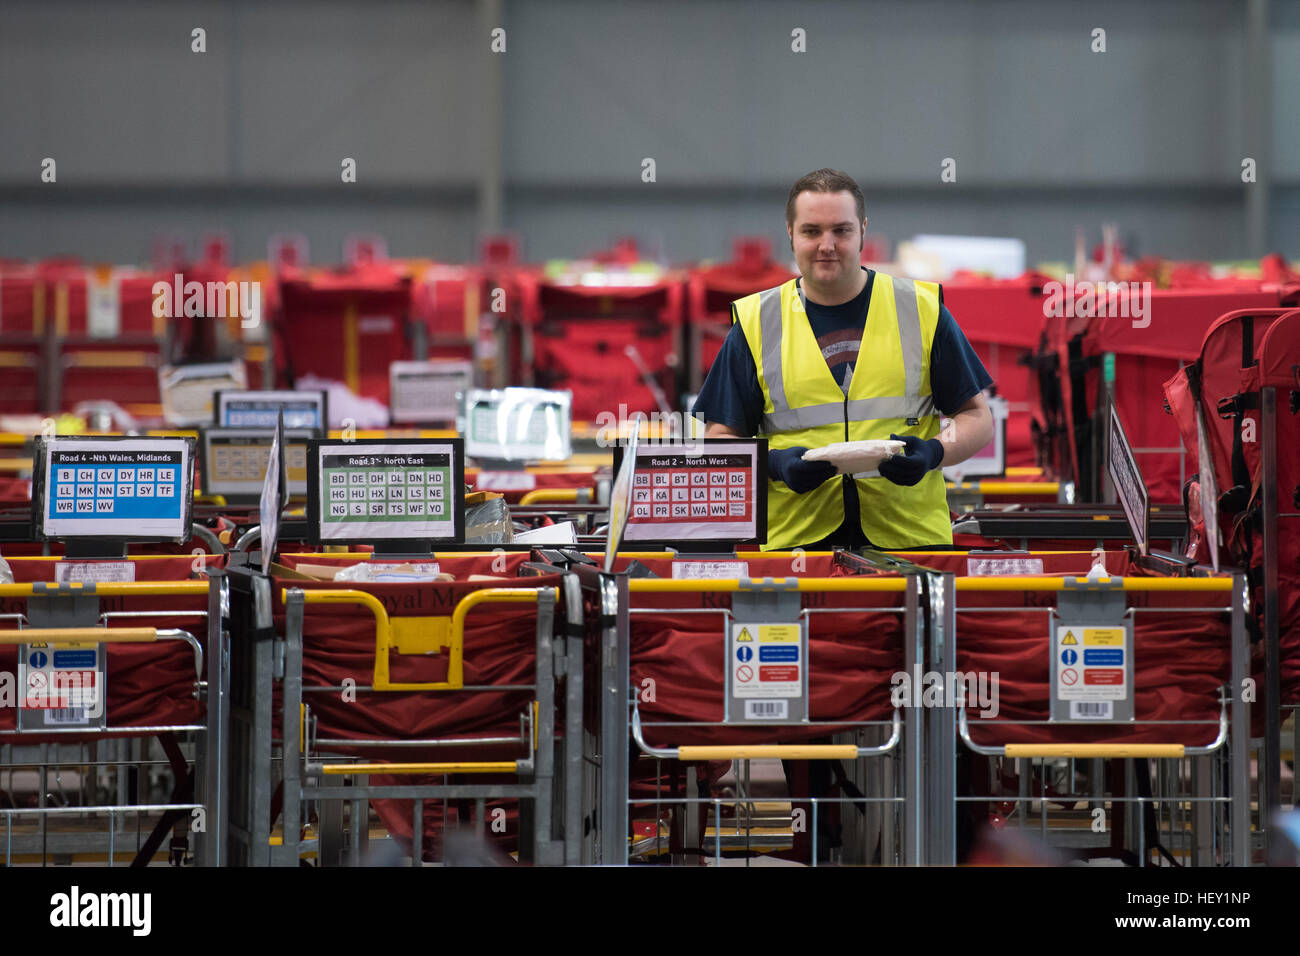 Royal Mail Christmas temp workers process Christmas mail at the Royal Mail Christmas sorting office in Llantrisant, South Wales, UK. Stock Photo